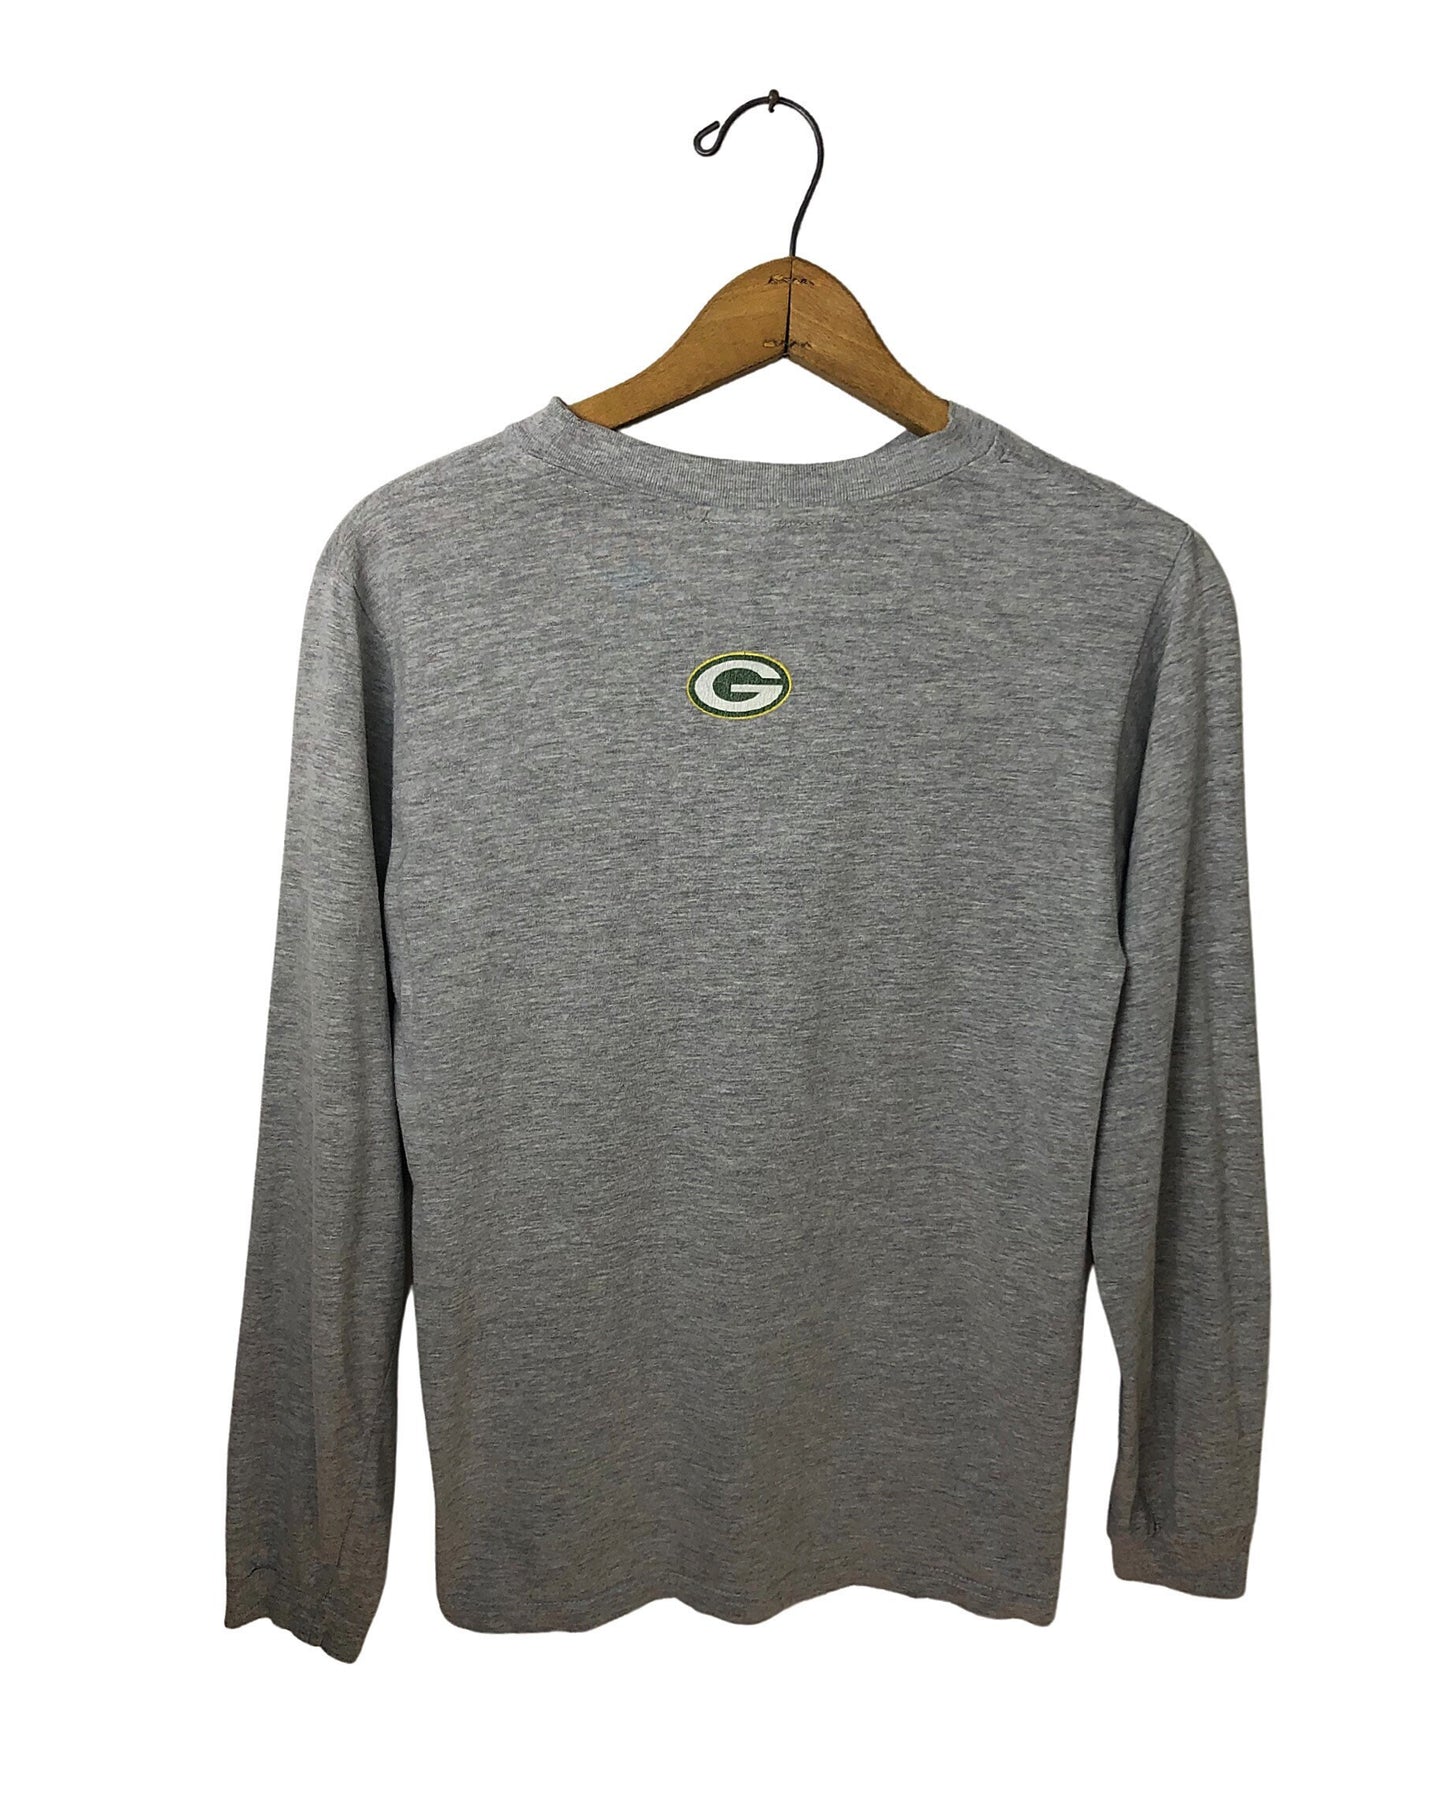 Vintage 90’s Green Bay Packers NIKE Swoosh 100% Cotton Long Sleeve Tee Kids size XL, Wms size S